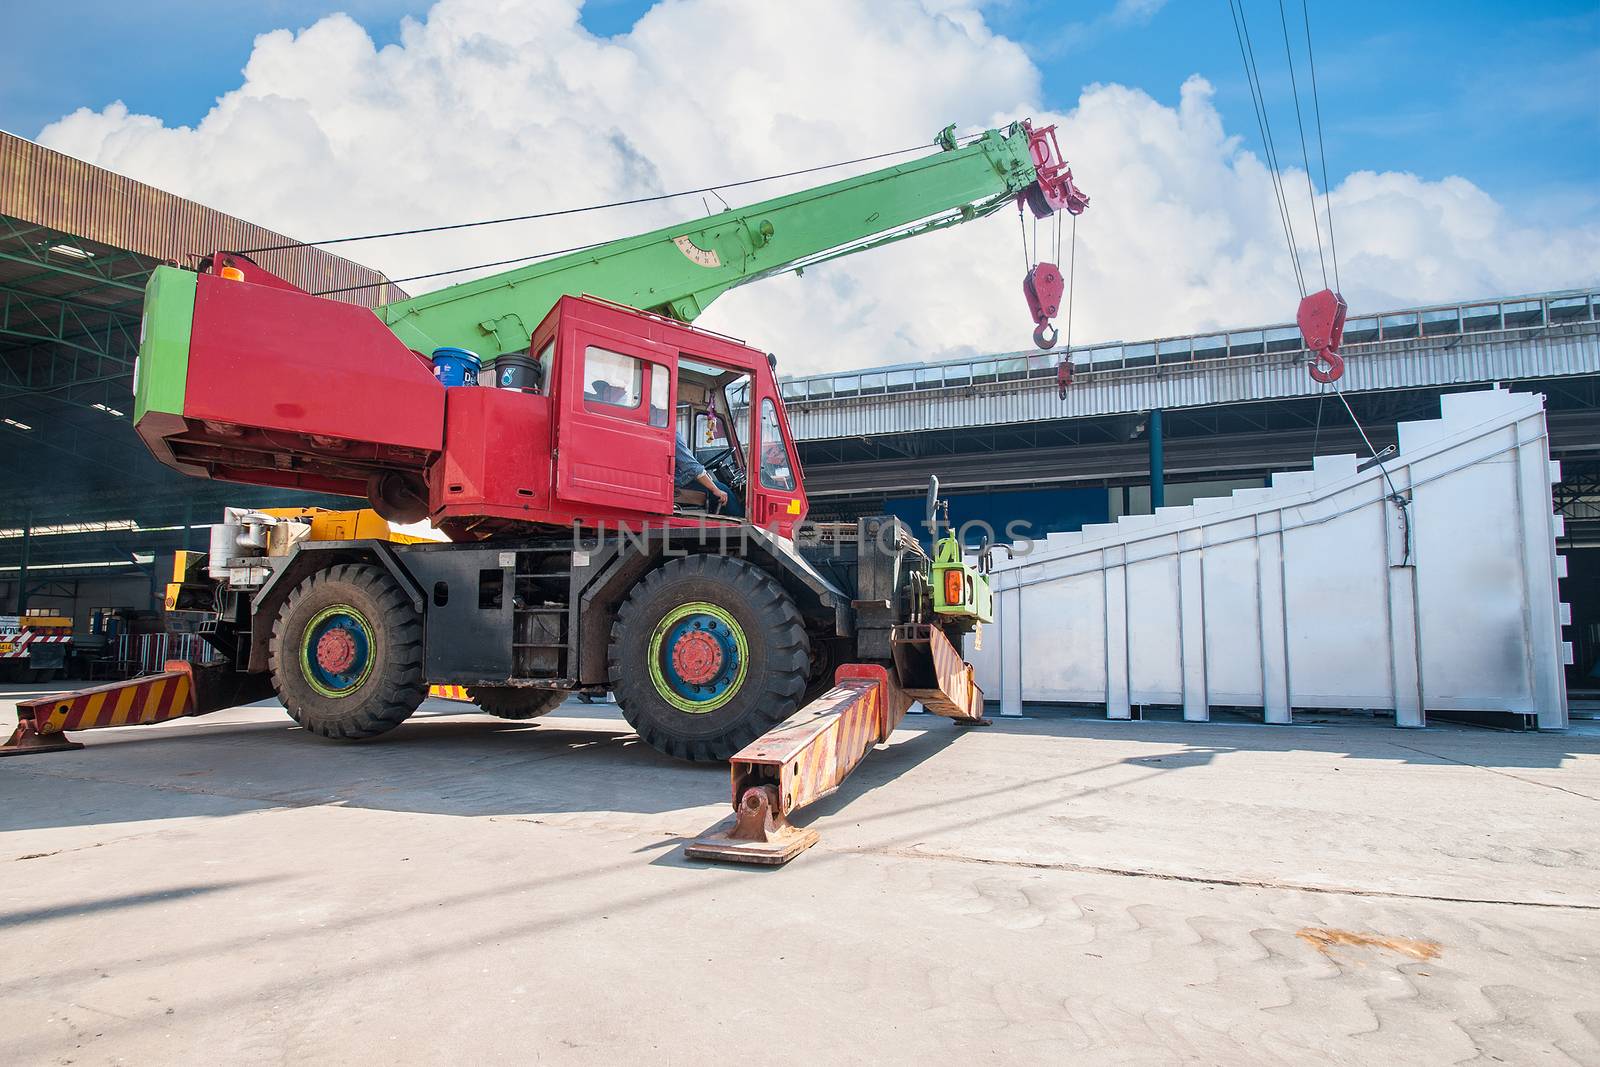 Mobile crane operating by lifting and moving an heavy electric generator